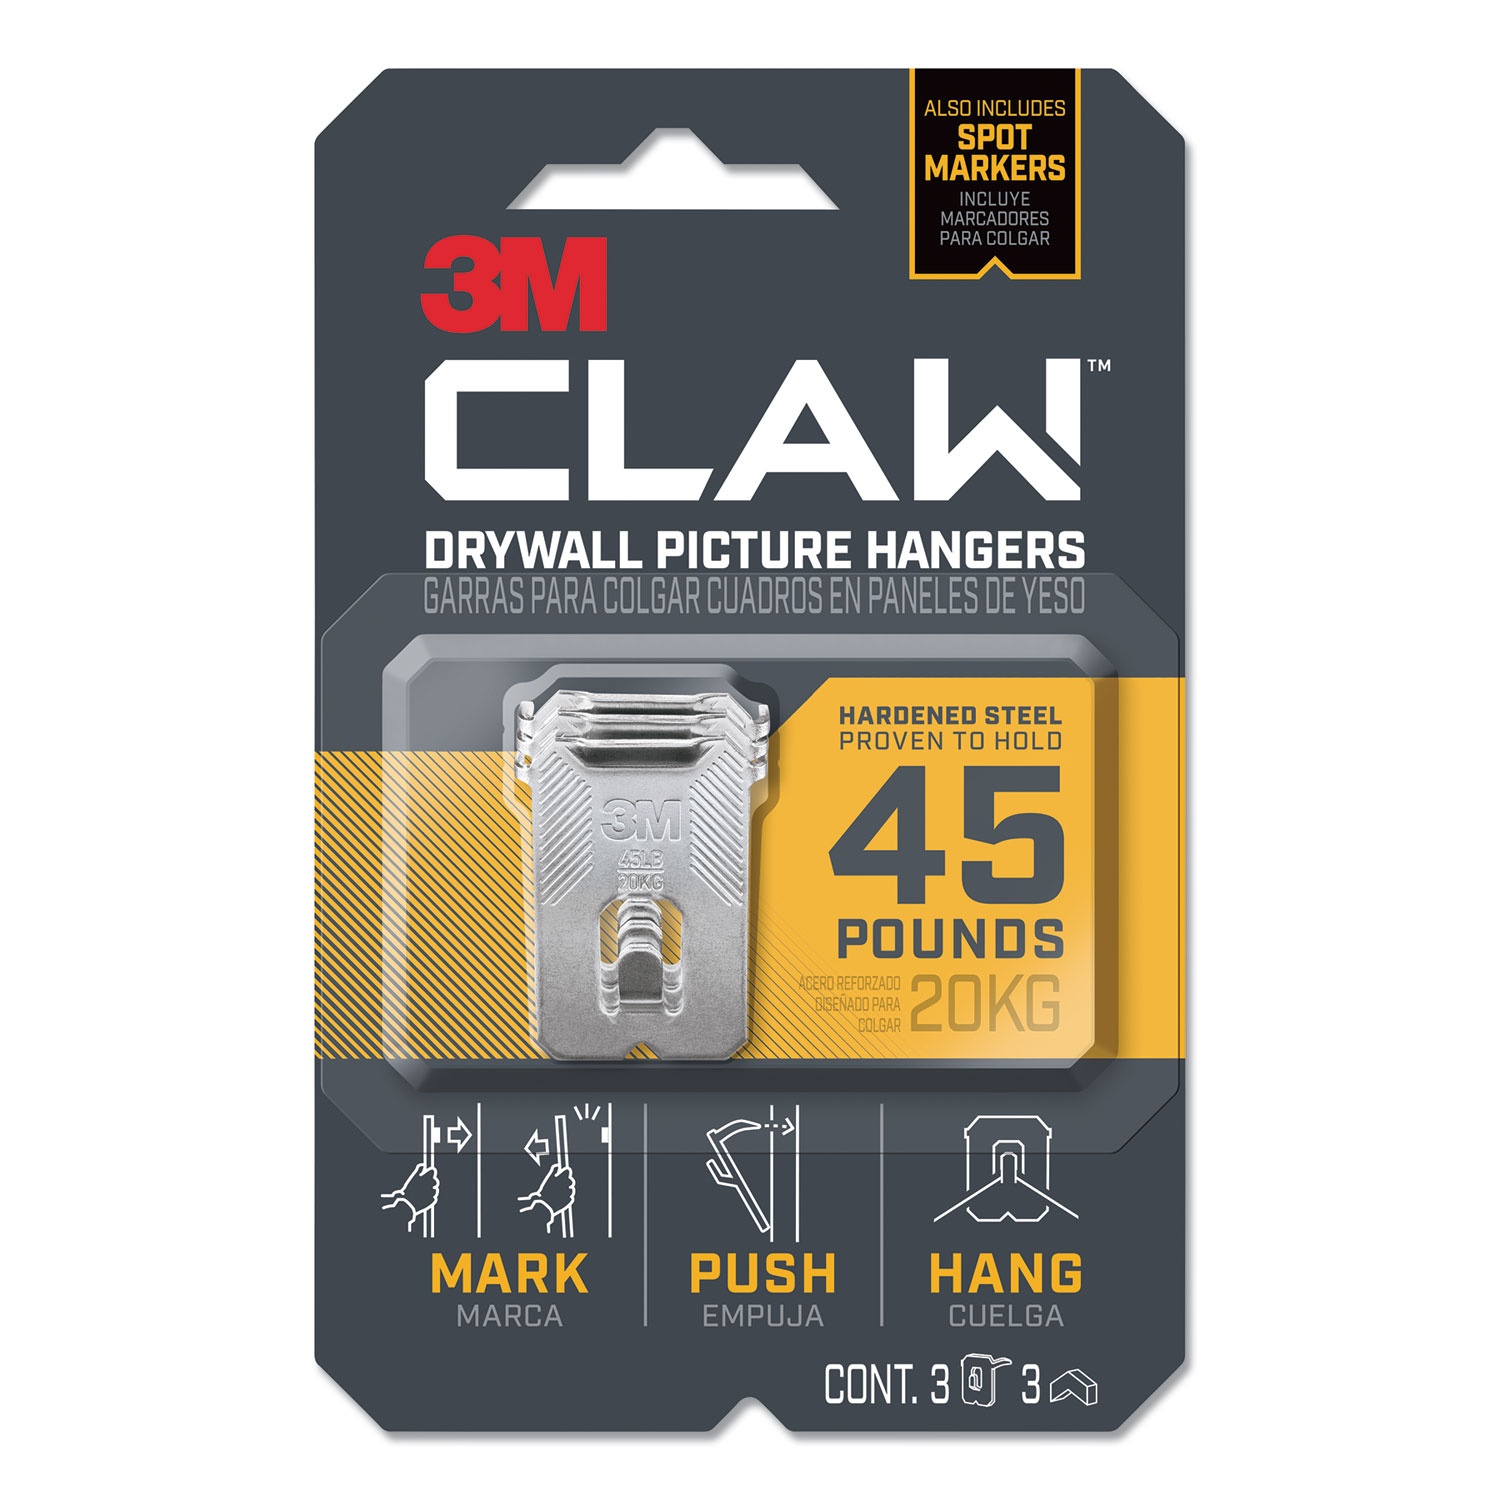  3M 3PH45M-3ES Claw Drywall Picture Hanger, Holds 45 lbs, 3 Hooks and 3 Spot Markers, Stainless Steel (MMM3PH45M3ES) 